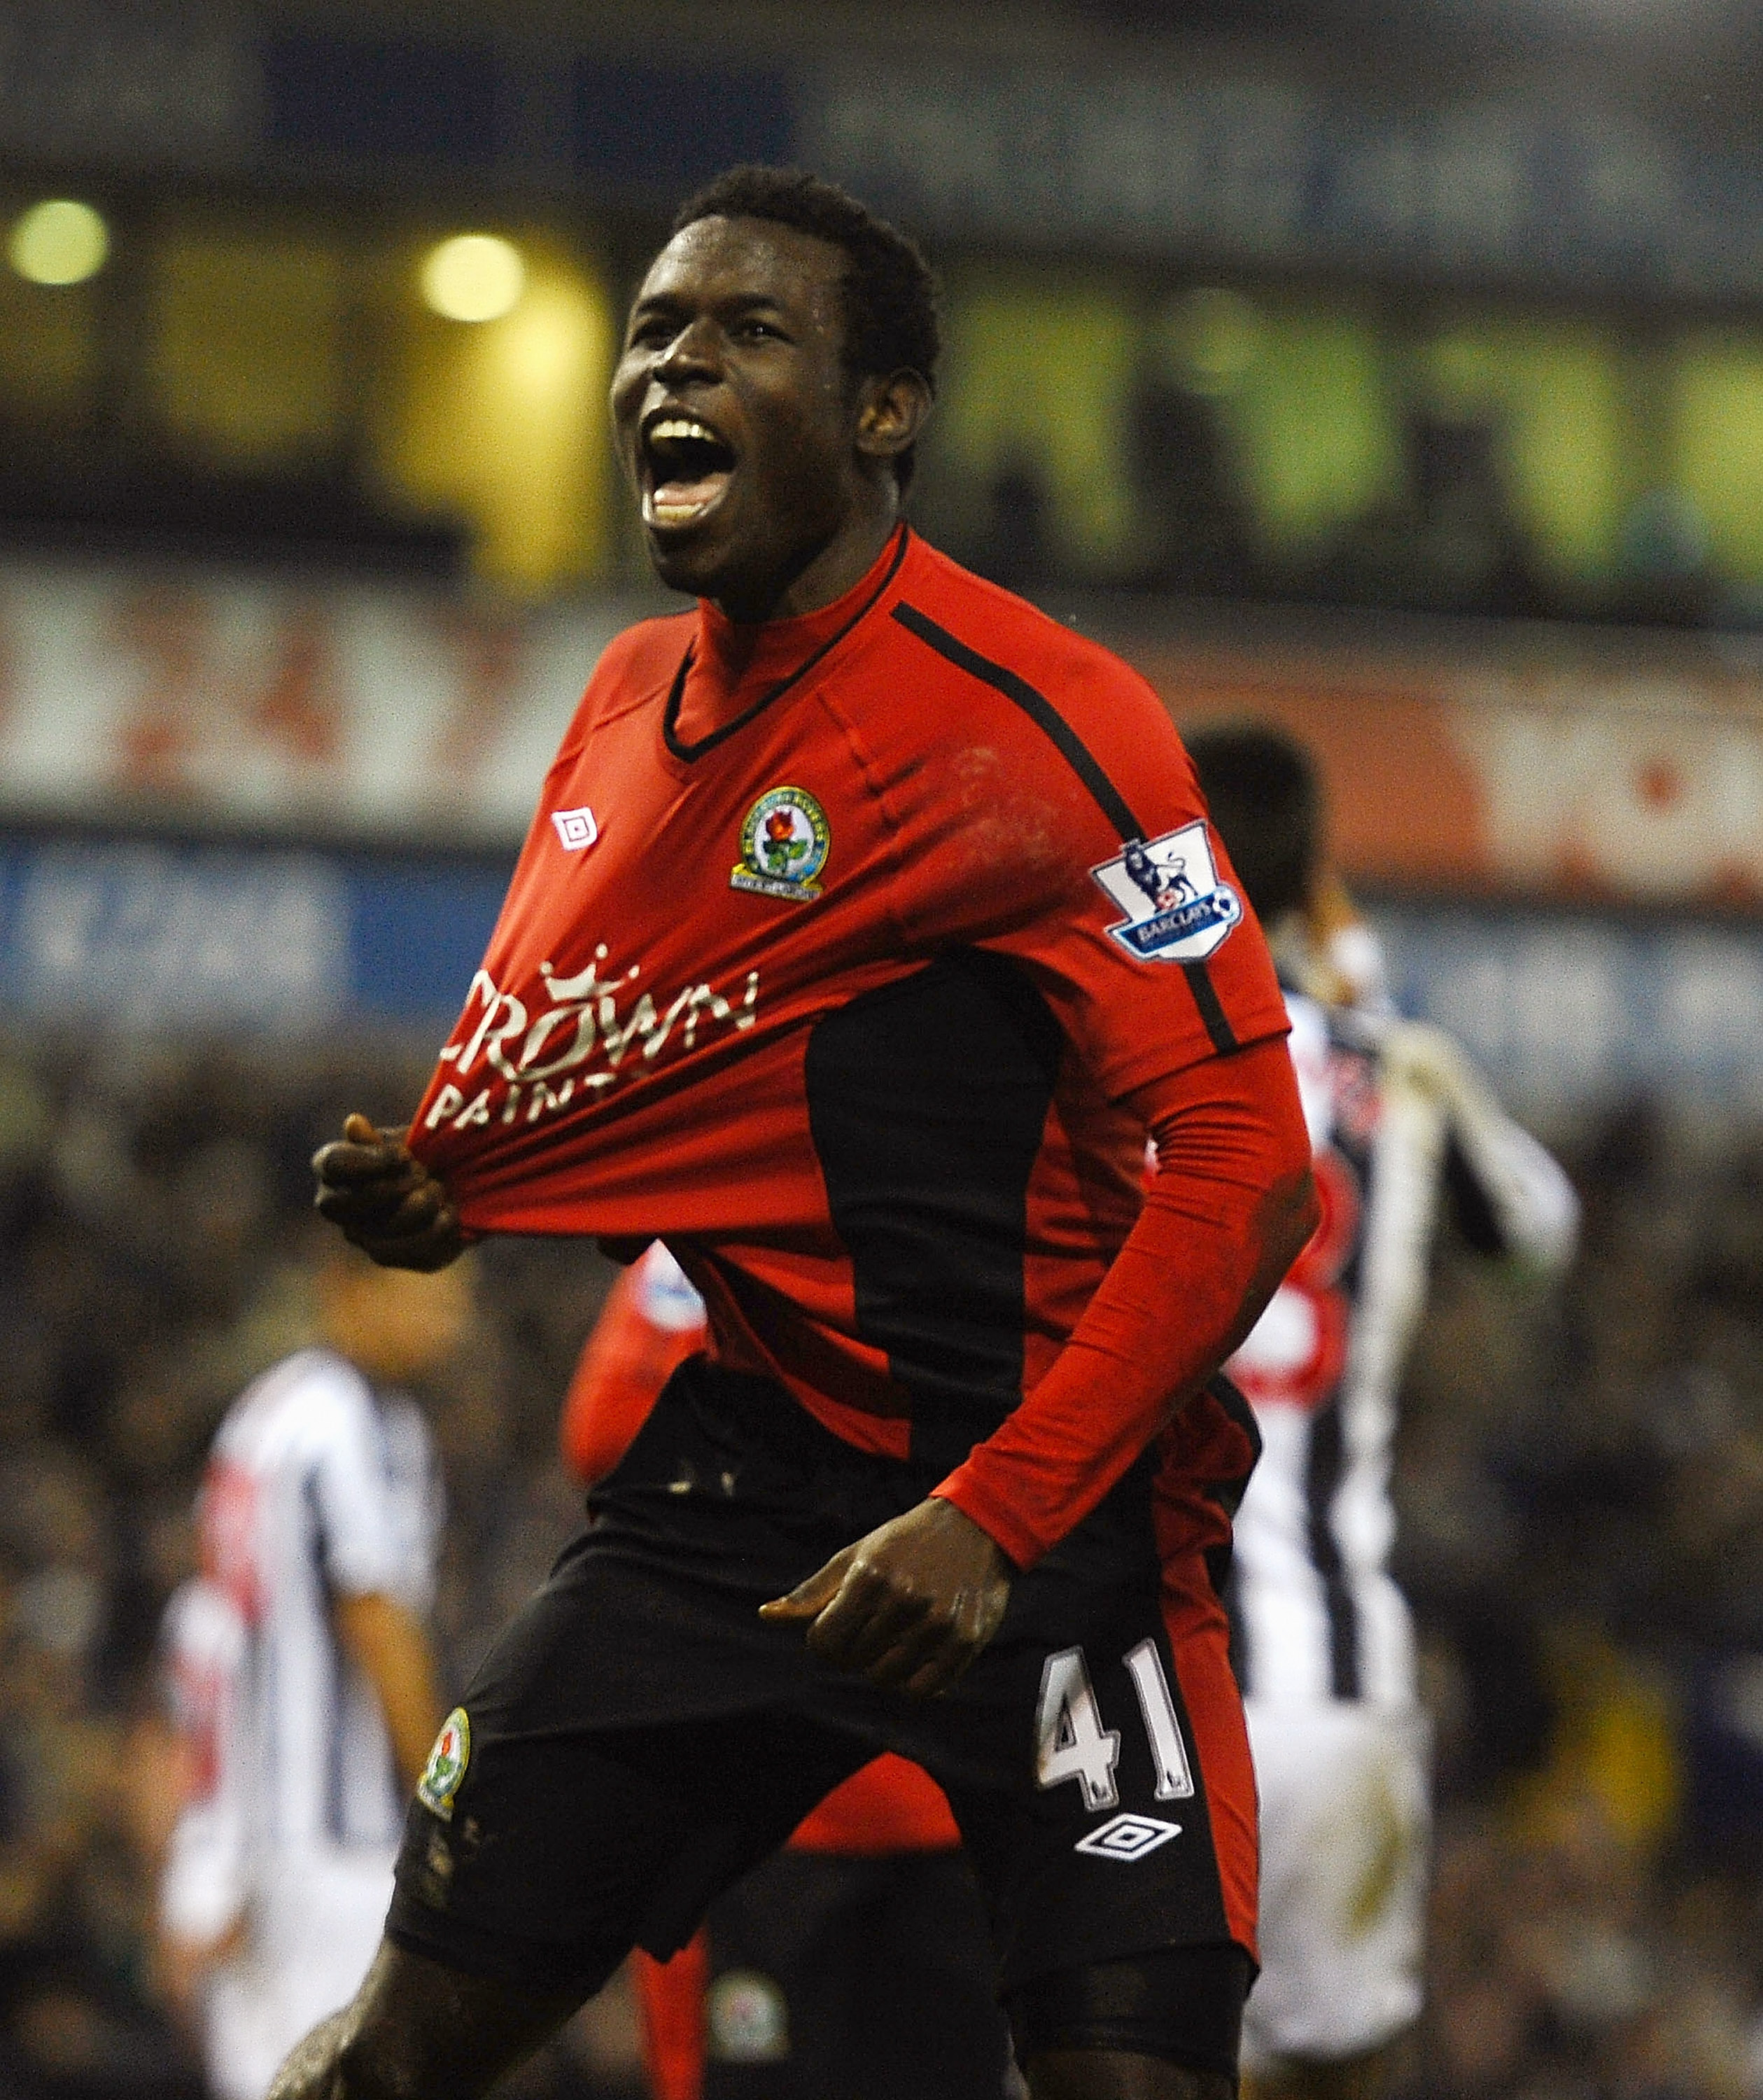 WEST BROMWICH, ENGLAND - DECEMBER 28:  Mame Biram Diouf of Blackburn Rovers celebrates scoring the third goal during the Barclays Premier League match between West Bromwich Albion and Blackburn Rovers at The Hawthorns on December 28, 2010 in West Bromwich